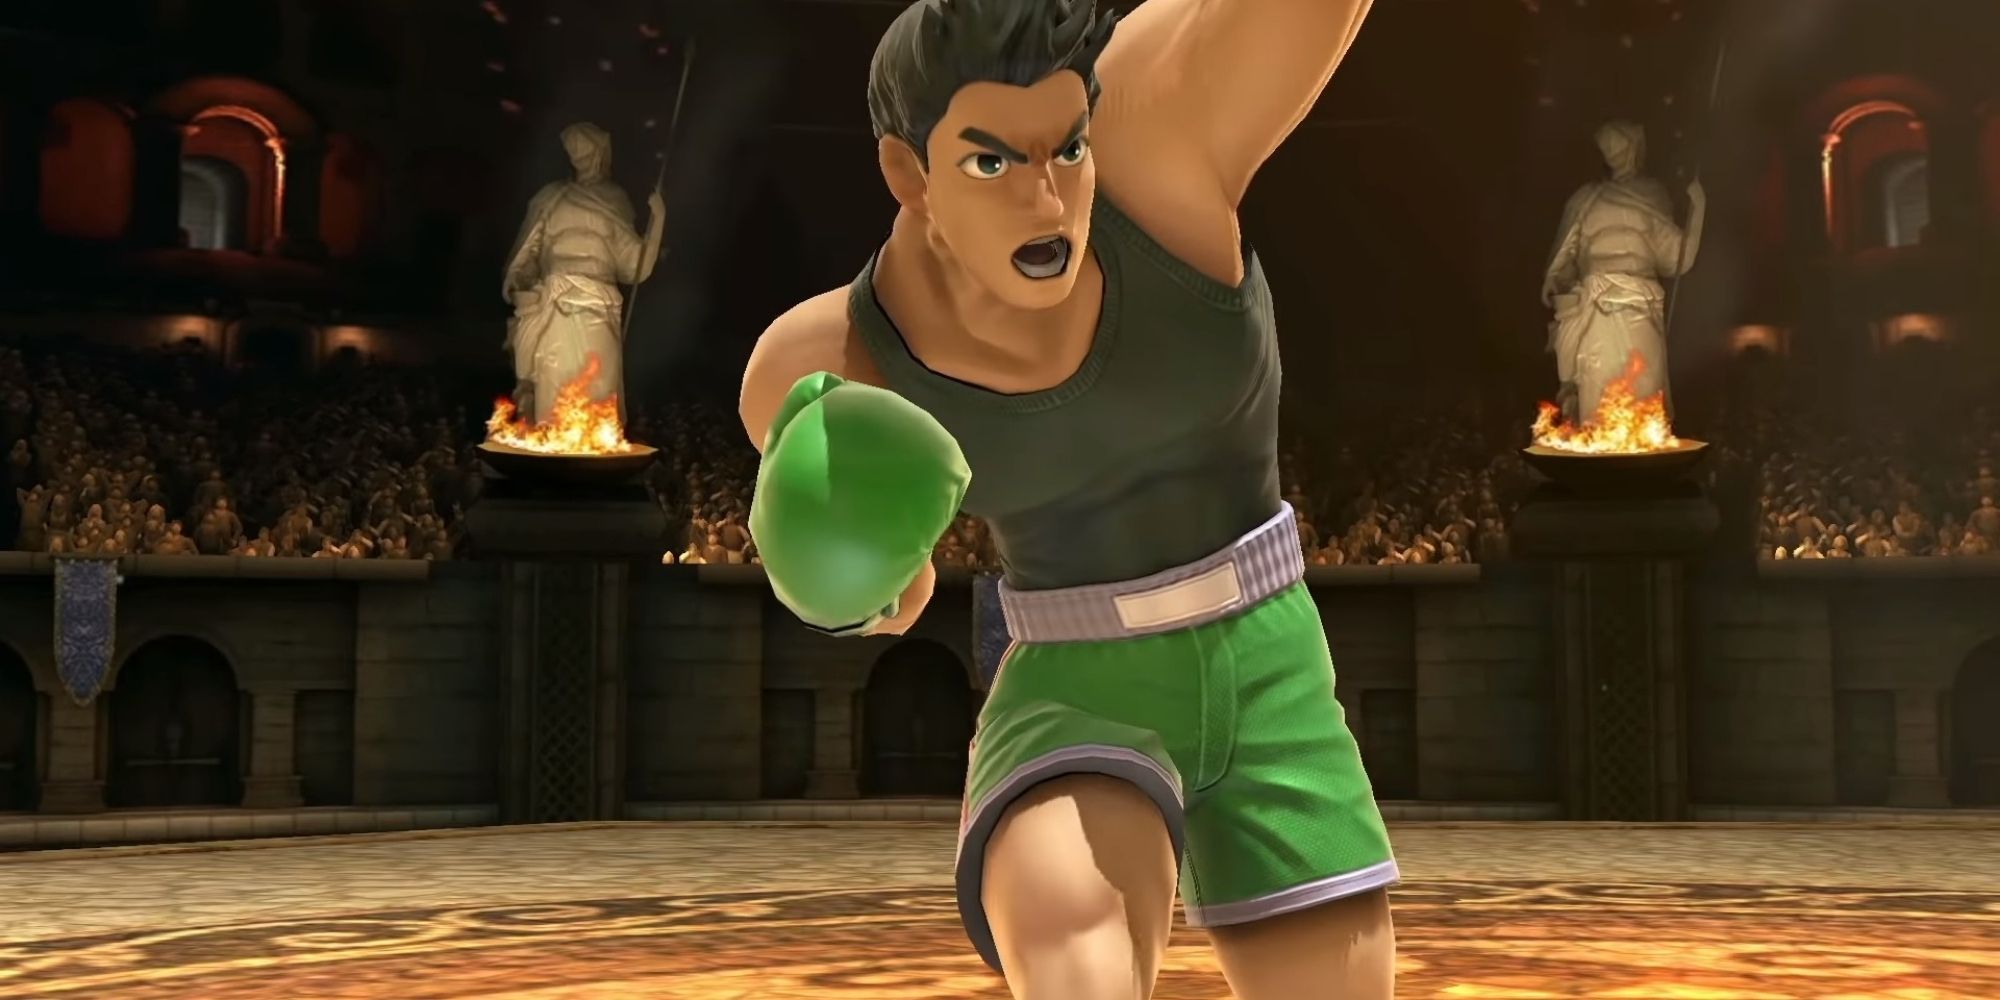 Little Mac throwing a punch in Super Smash Bros Ultimate